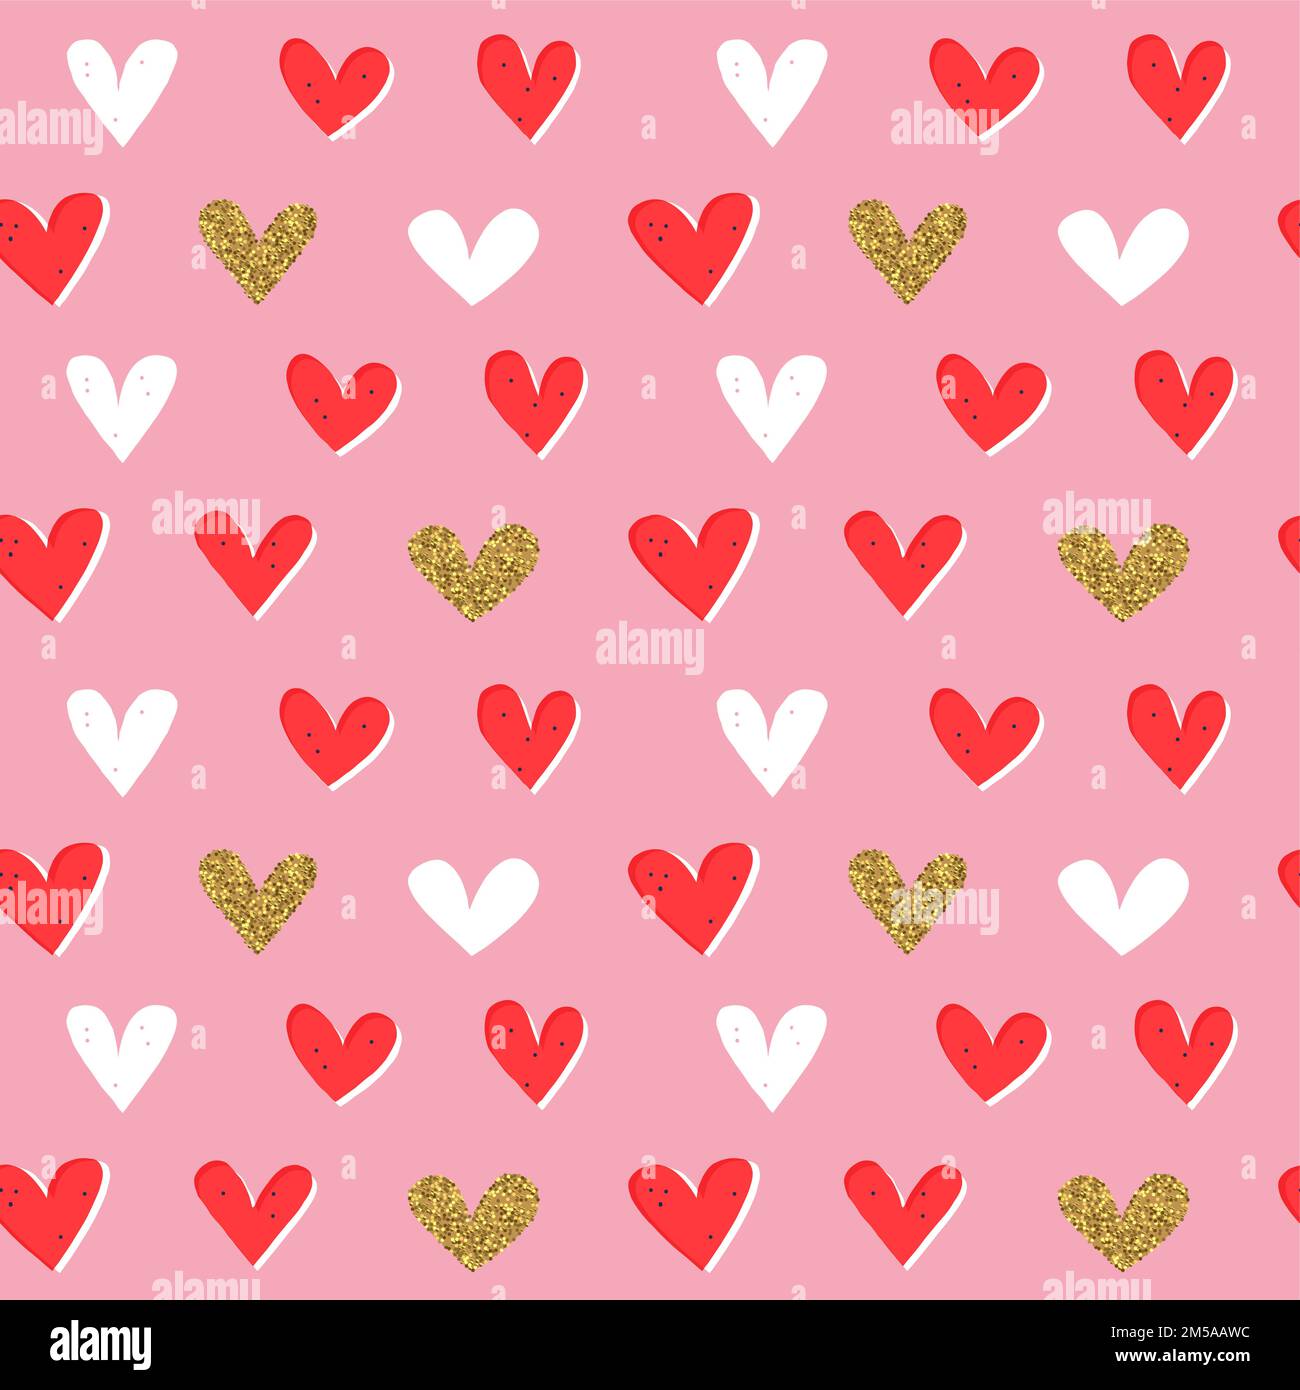 Valentine's day heart shape cartoon seamless pattern. Luxury gold glitter romantic doodle background for holiday print or love concept. Stock Vector